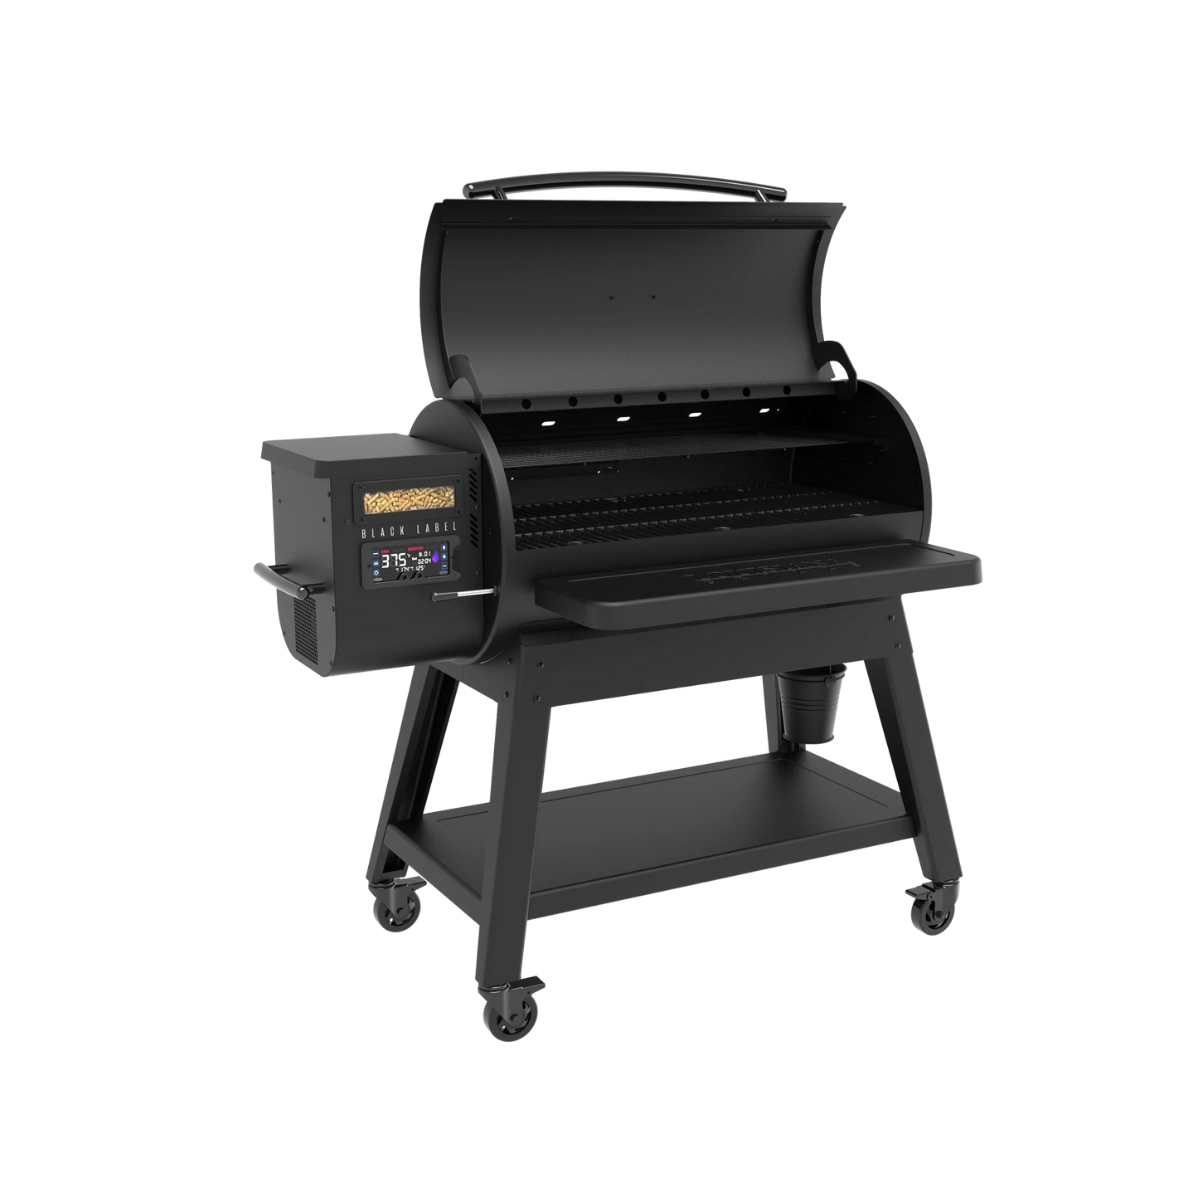 1200 Black Label Series Grill With Wifi Control 2